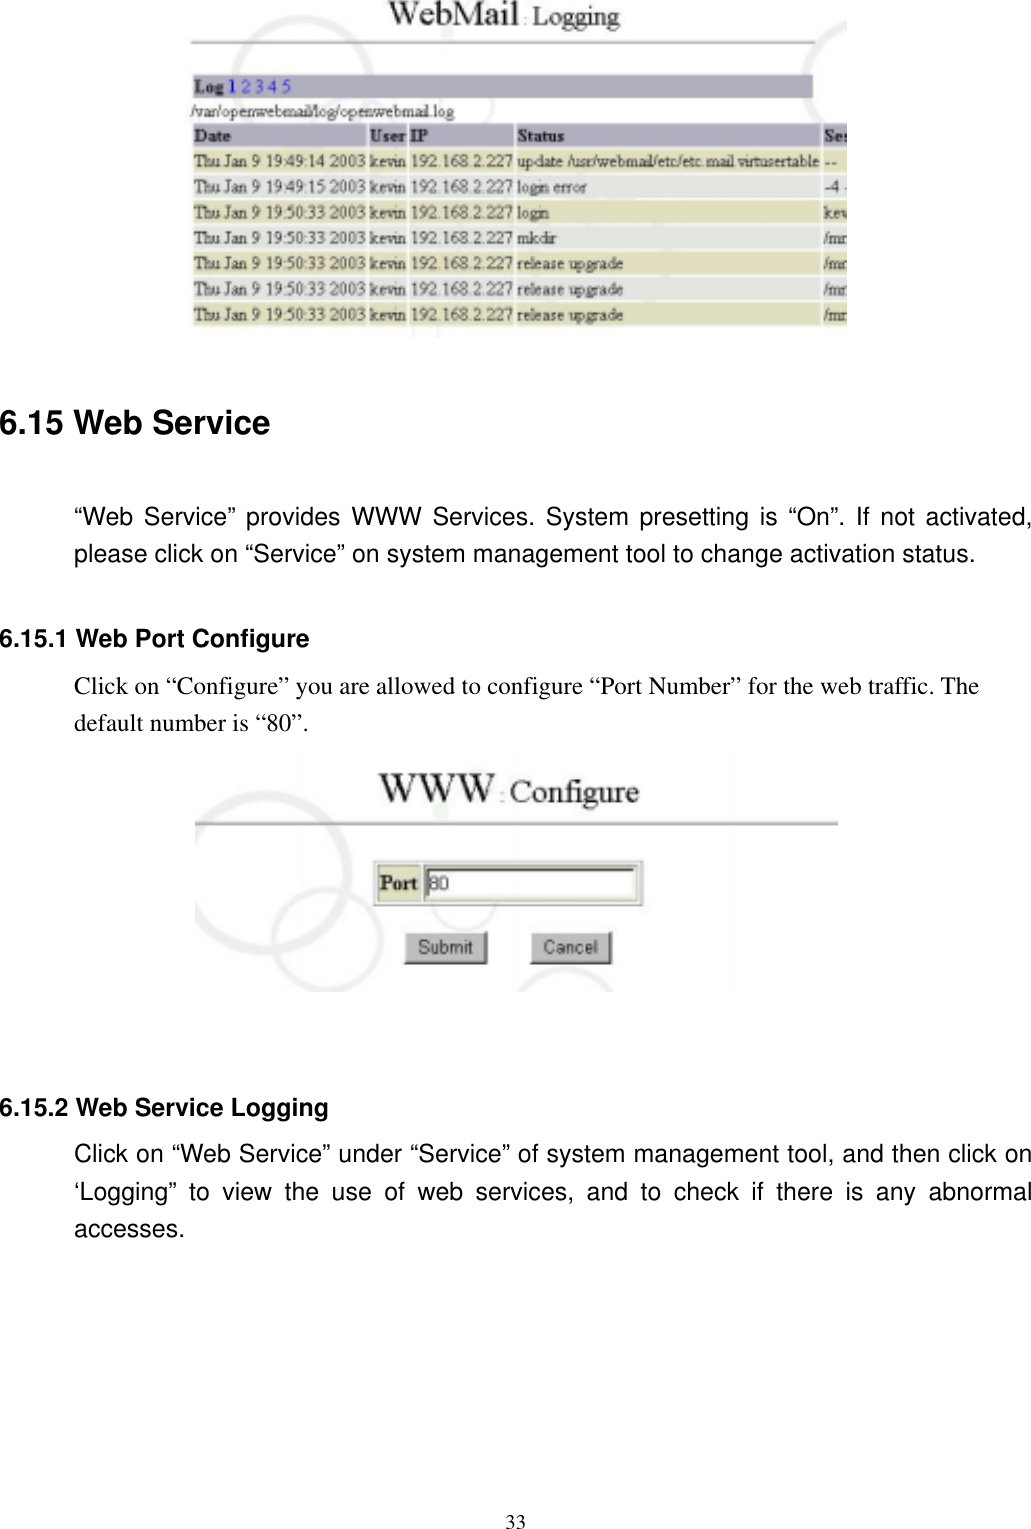  33  6.15 Web Service  “Web Service” provides WWW Services. System presetting is “On”. If not activated, please click on “Service” on system management tool to change activation status.    6.15.1 Web Port Configure       Click on “Configure” you are allowed to configure “Port Number” for the web traffic. The default number is “80”.          6.15.2 Web Service Logging Click on “Web Service” under “Service” of system management tool, and then click on ‘Logging” to view the use of web services, and to check if there is any abnormal accesses.   